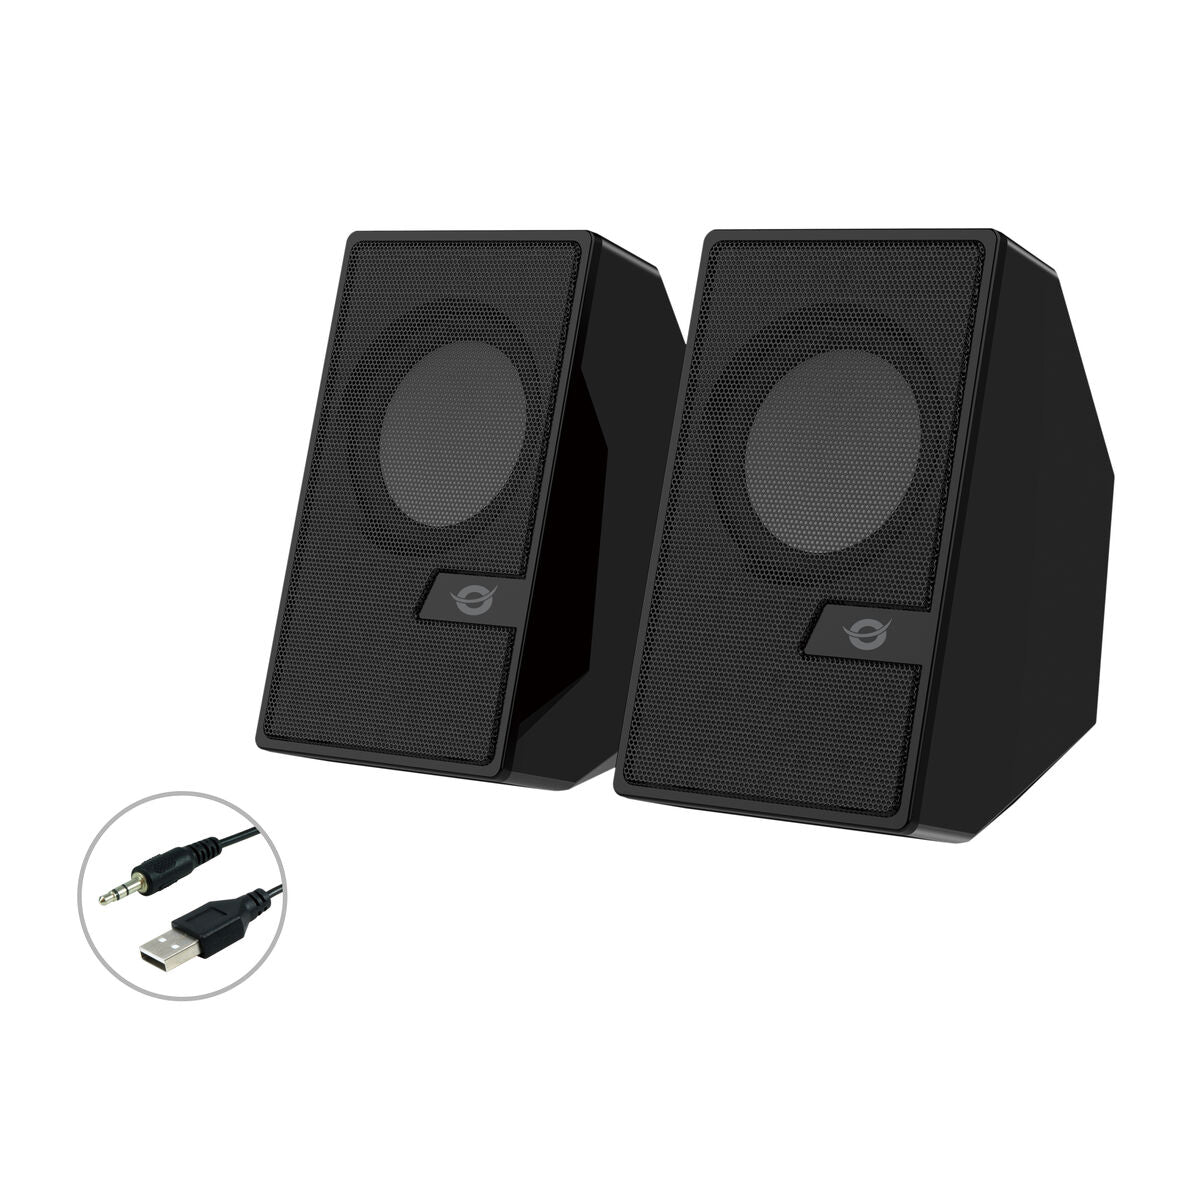 PC Speakers Conceptronic 120839307101, Conceptronic, Electronics, TV, Video and home cinema, pc-speakers-conceptronic-120839307101, Brand_Conceptronic, category-reference-2609, category-reference-2637, category-reference-2882, category-reference-t-18805, category-reference-t-19653, category-reference-t-19922, category-reference-t-21404, cinema and television, computers / components, Condition_NEW, entertainment, music, Price_20 - 50, RiotNook